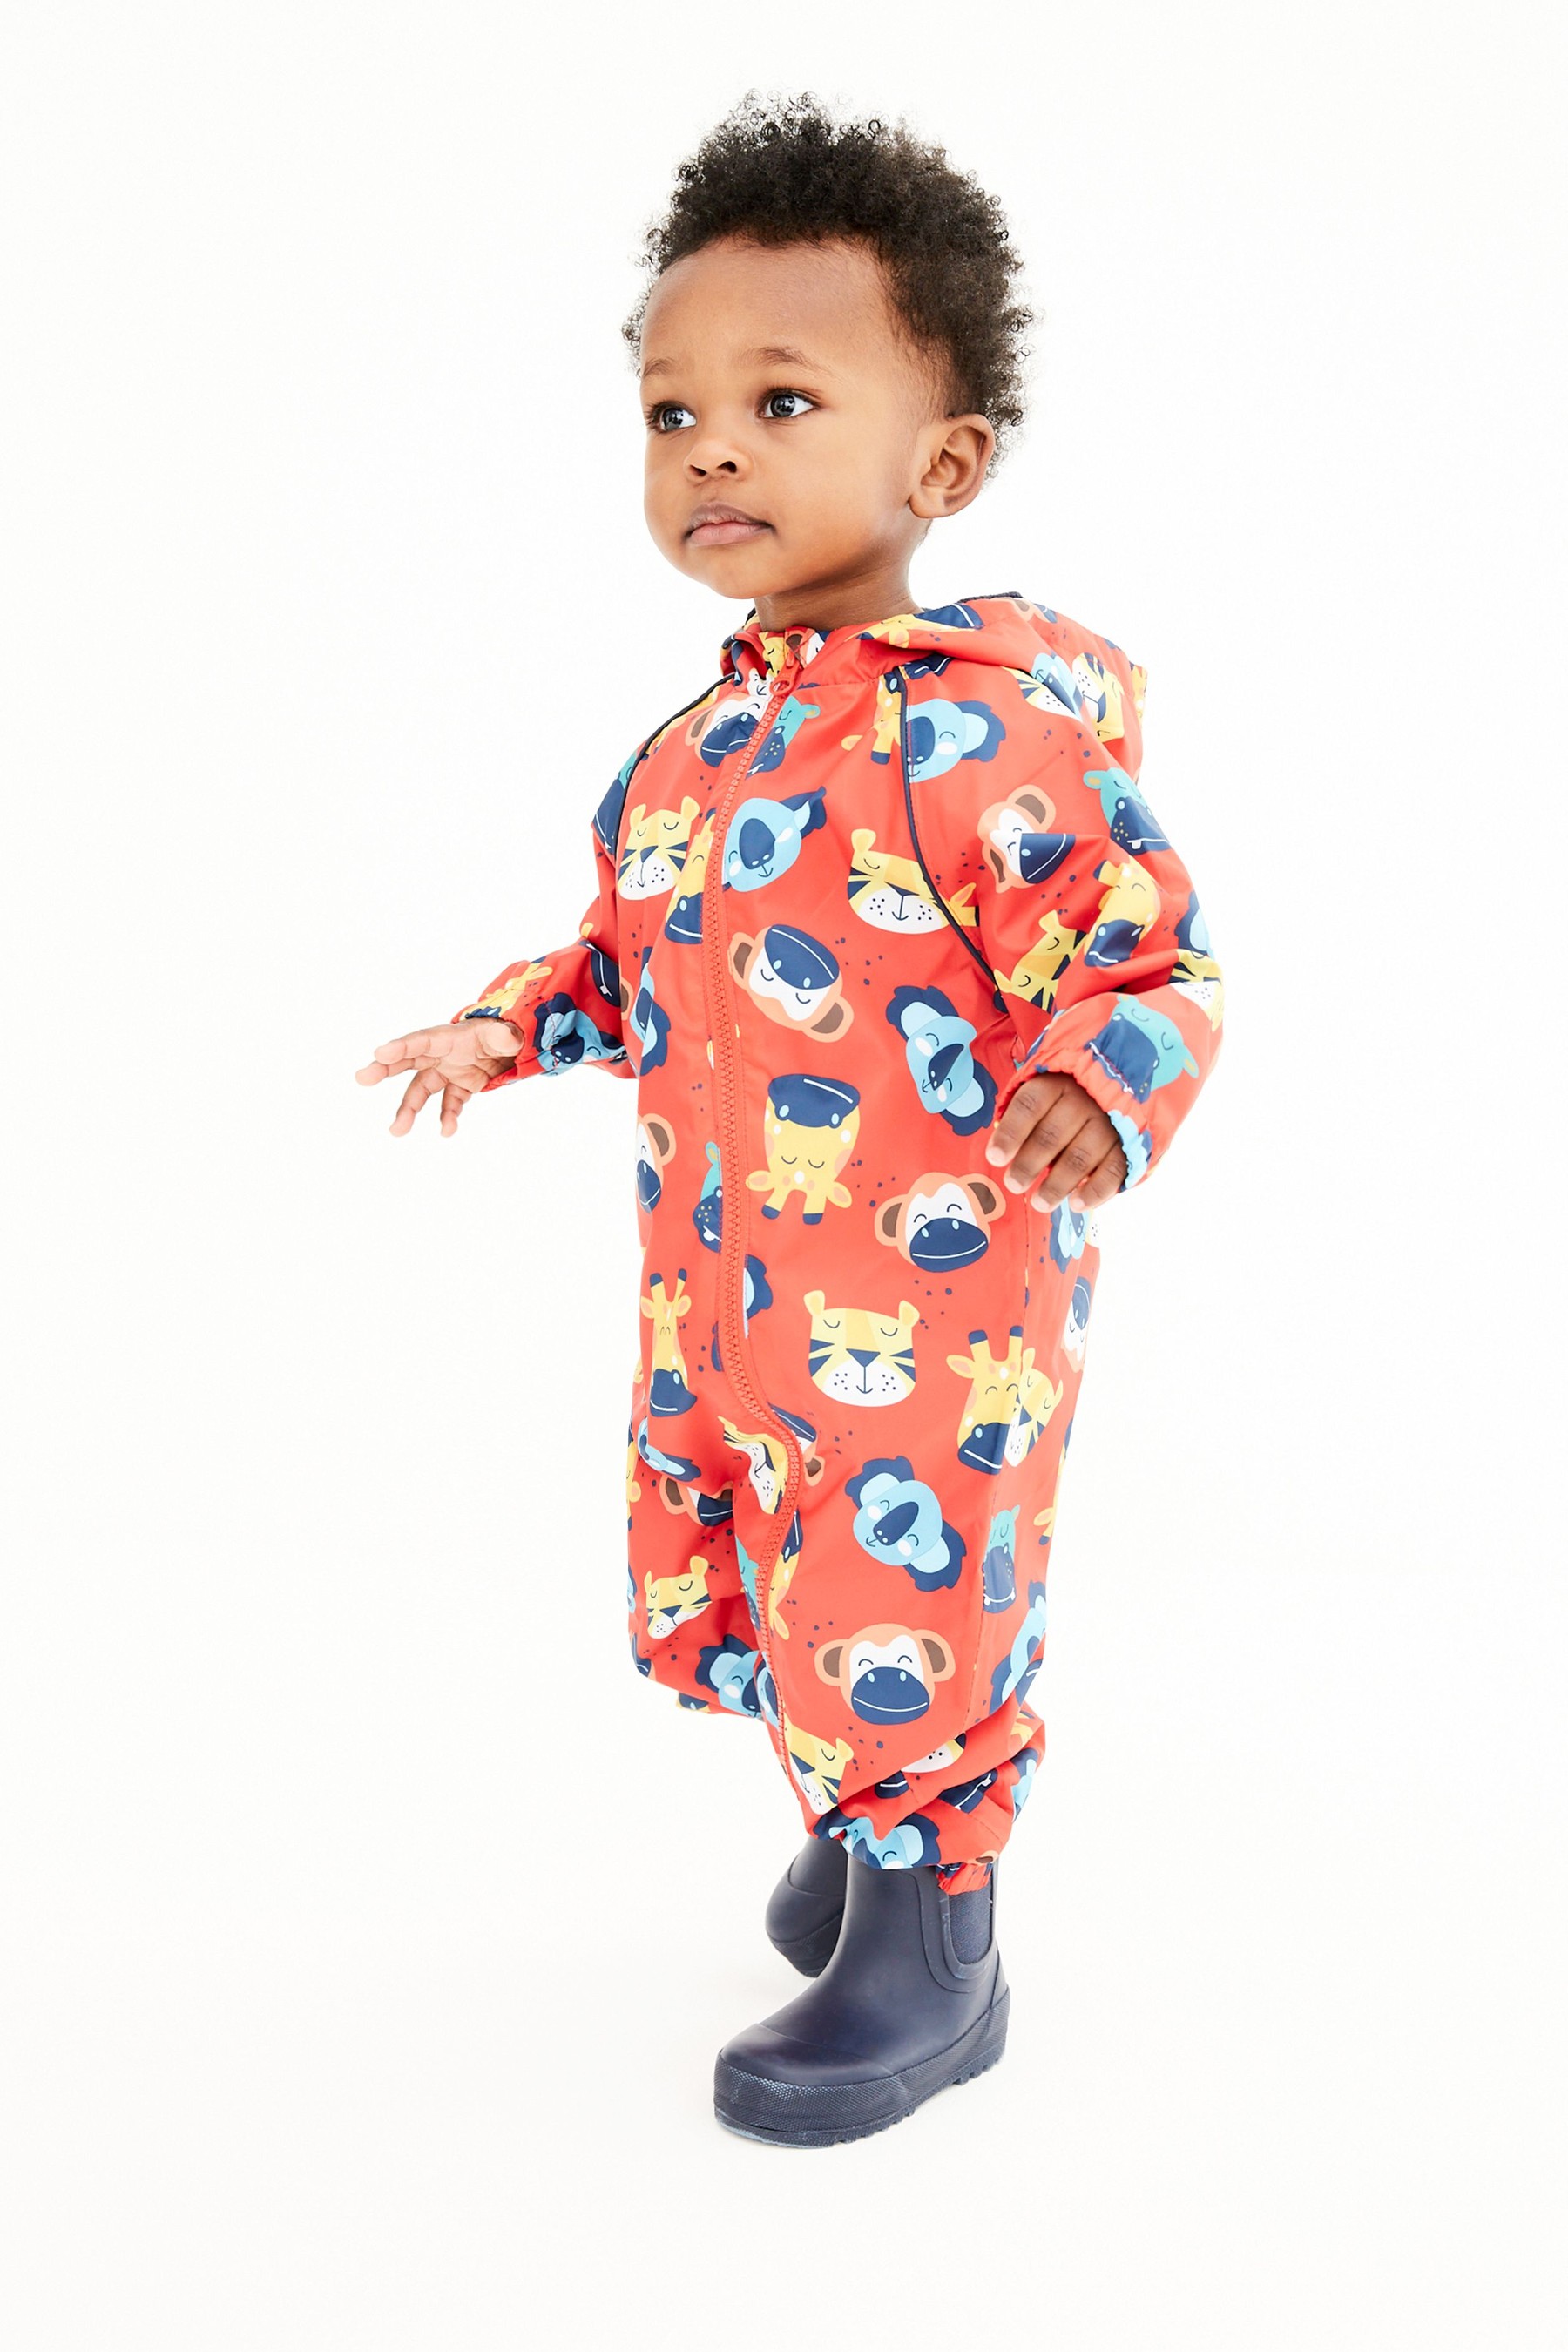 Waterproof Fleece Lined Puddlesuit (3mths-7yrs)